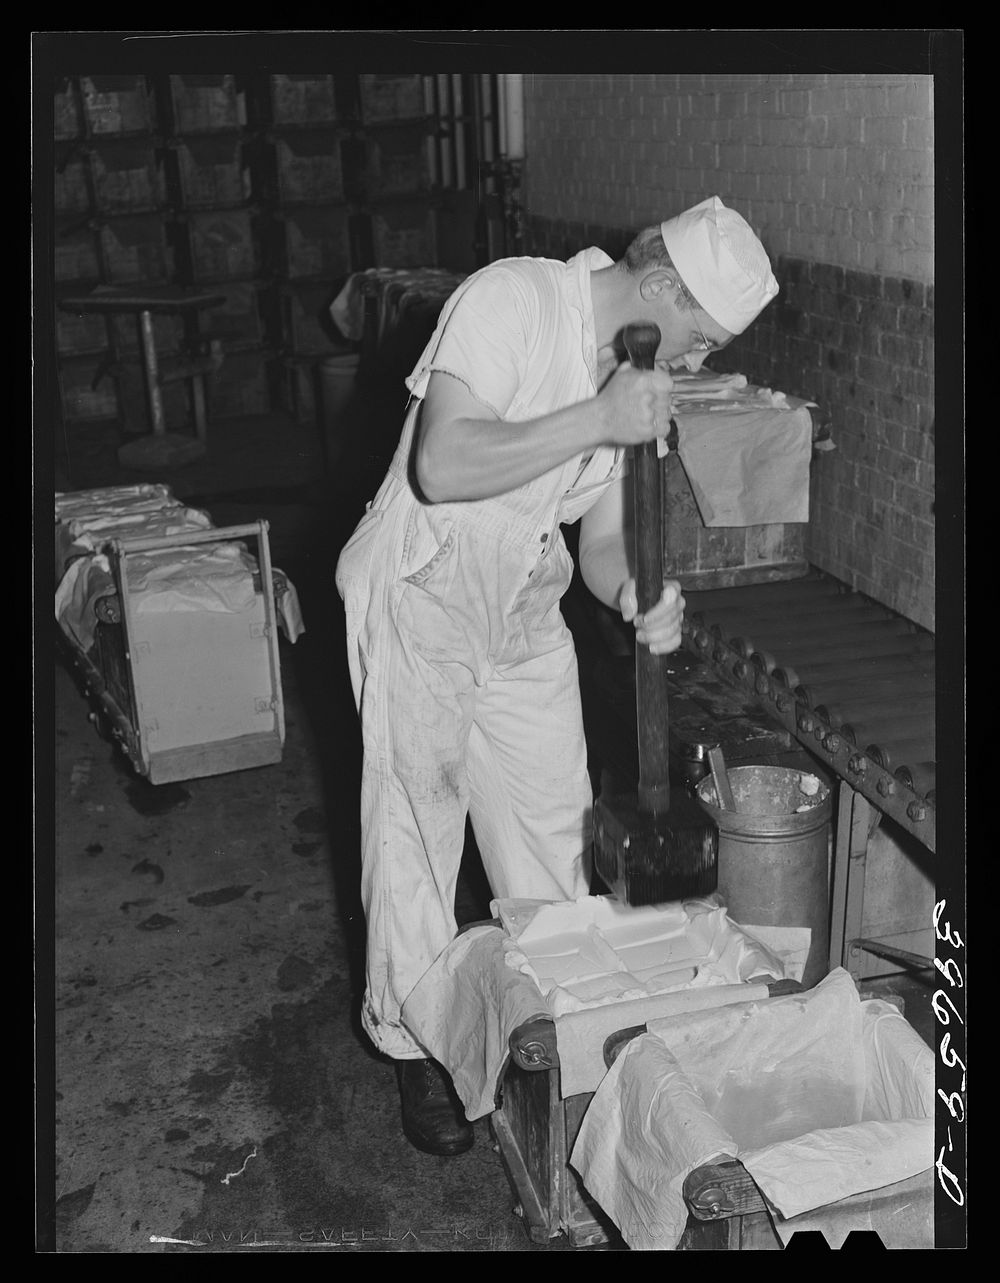 Packing butter into tubs at the Dairymen's Cooperative Creamery. Caldwell, Canyon County, Idaho. The dairymen's cooperative…